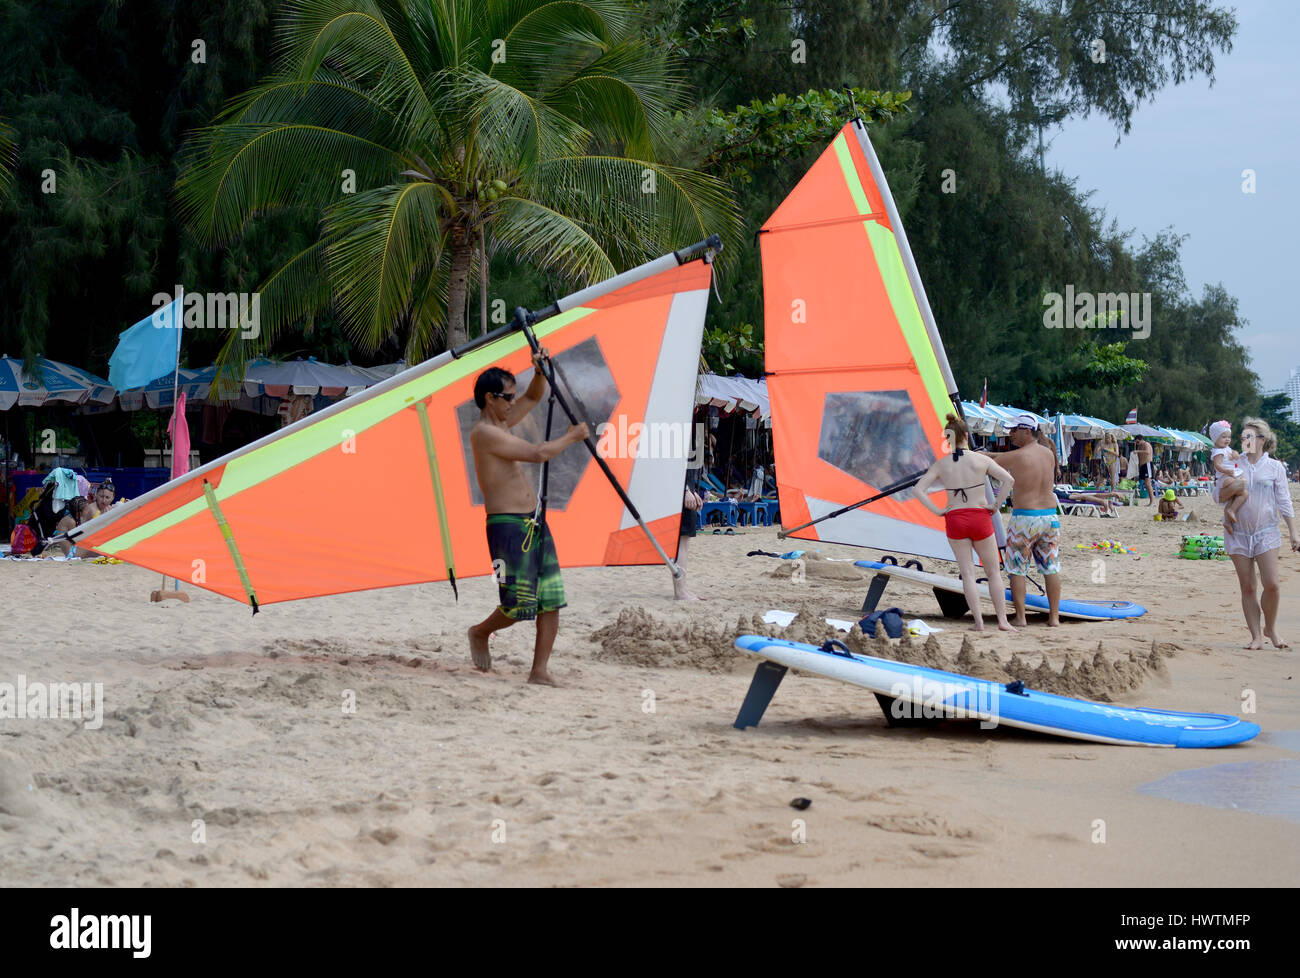 Preparation for windsurfing on the beach Stock Photo